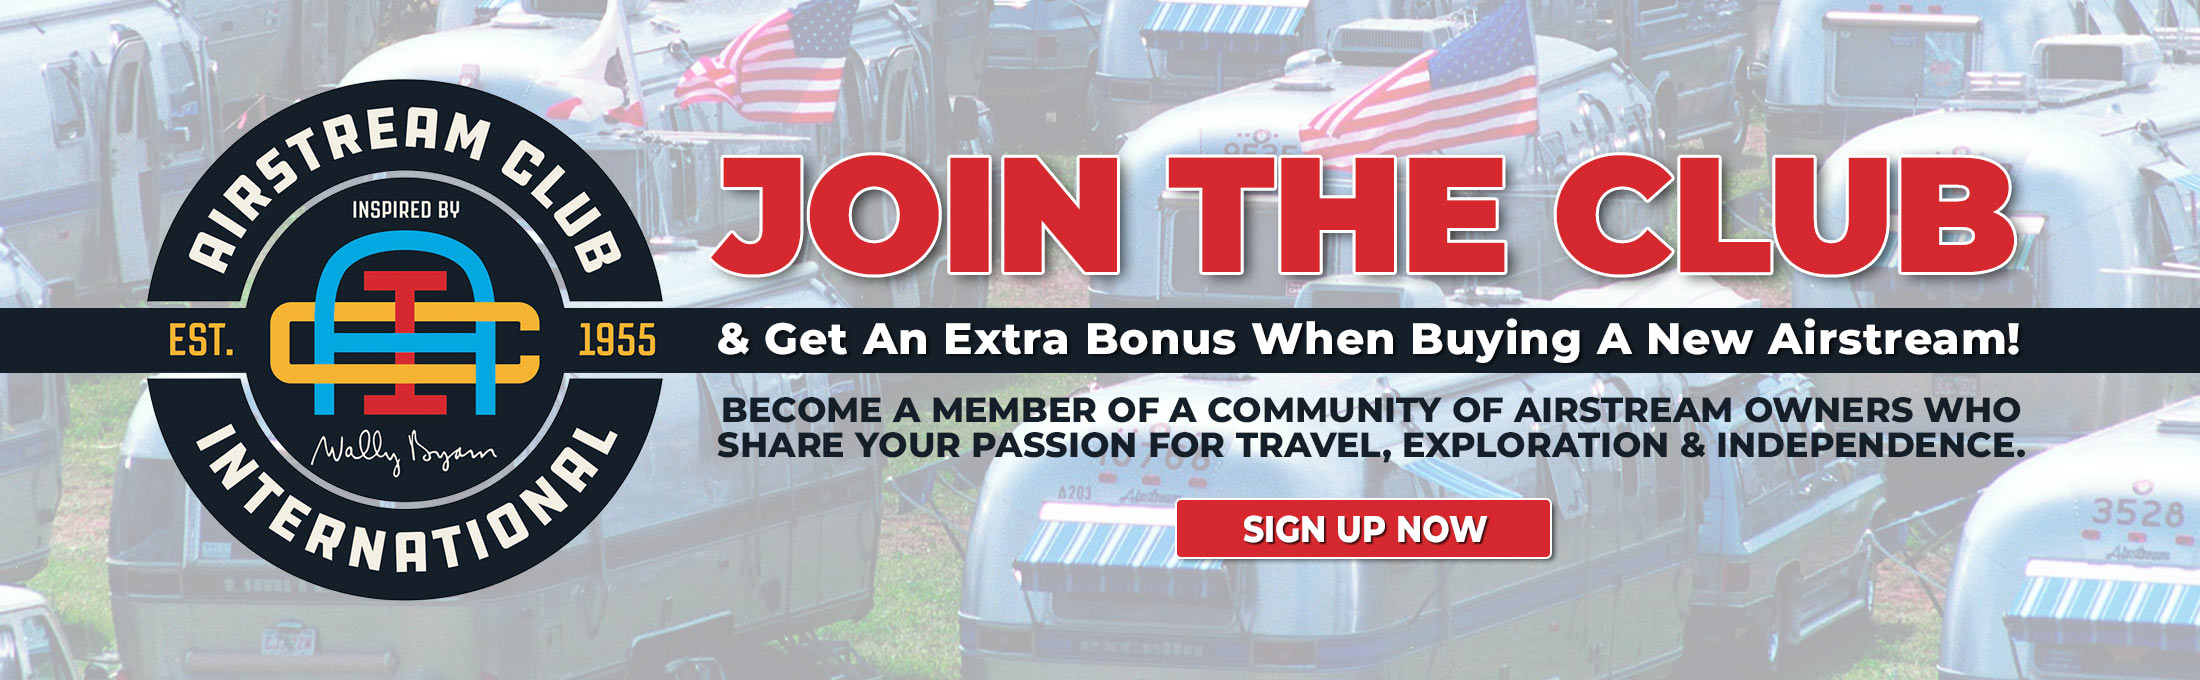 Airstream Club International
Join the club and get an extra bonus when buying a new Airstream!